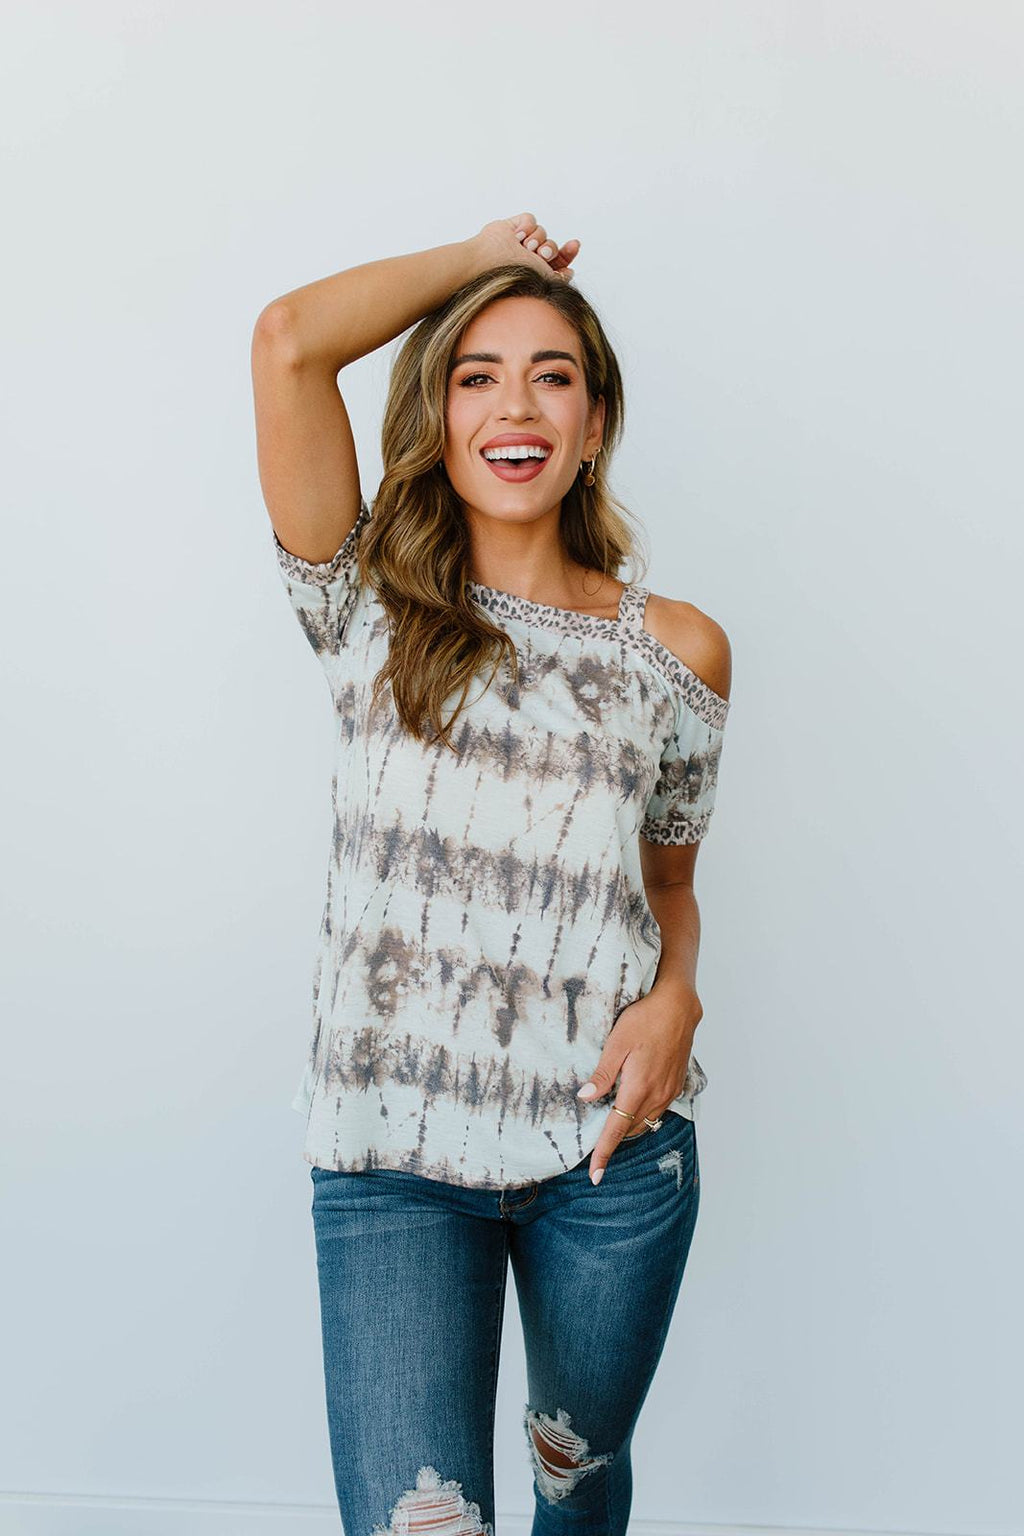 Shania Cold Shoulder Top In Mint - On Hand-1XL, 2XL, 3XL, 8-4-2020, BFCM2020, Group A, Group B, Group C, Group D, Large, Made in the USA, Medium, On hand, Plus, Small, Tops, Warehouse Sale, XL, XS-Small-Womens Artisan USA American Made Clothing Accessories